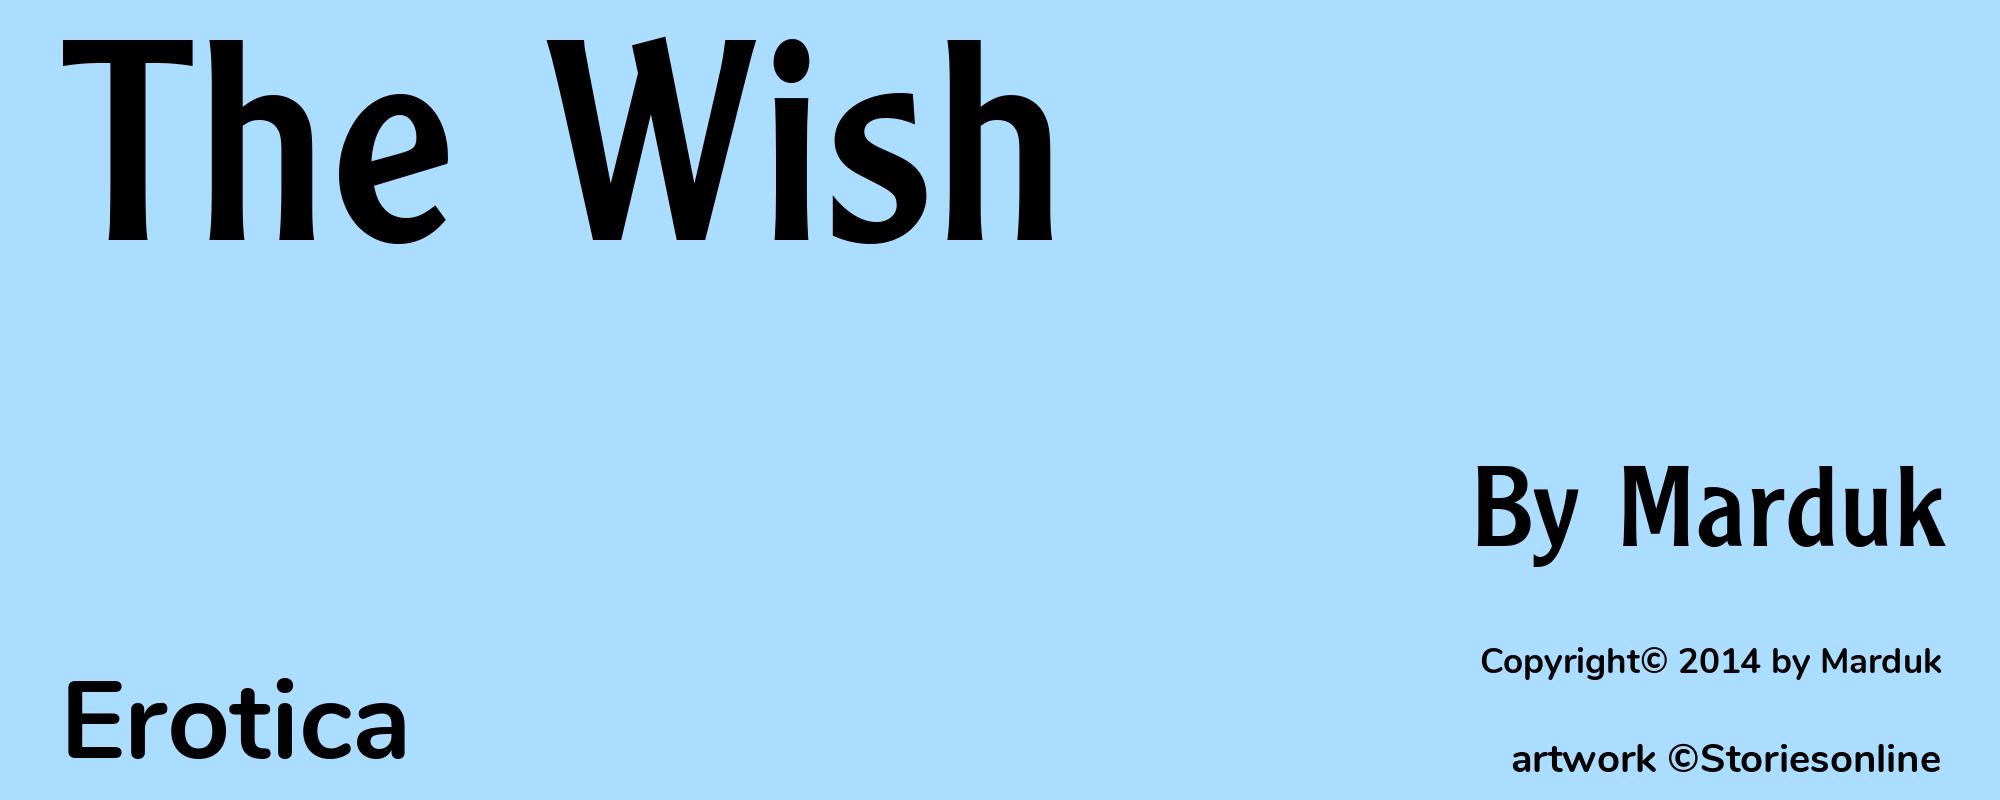 The Wish - Cover